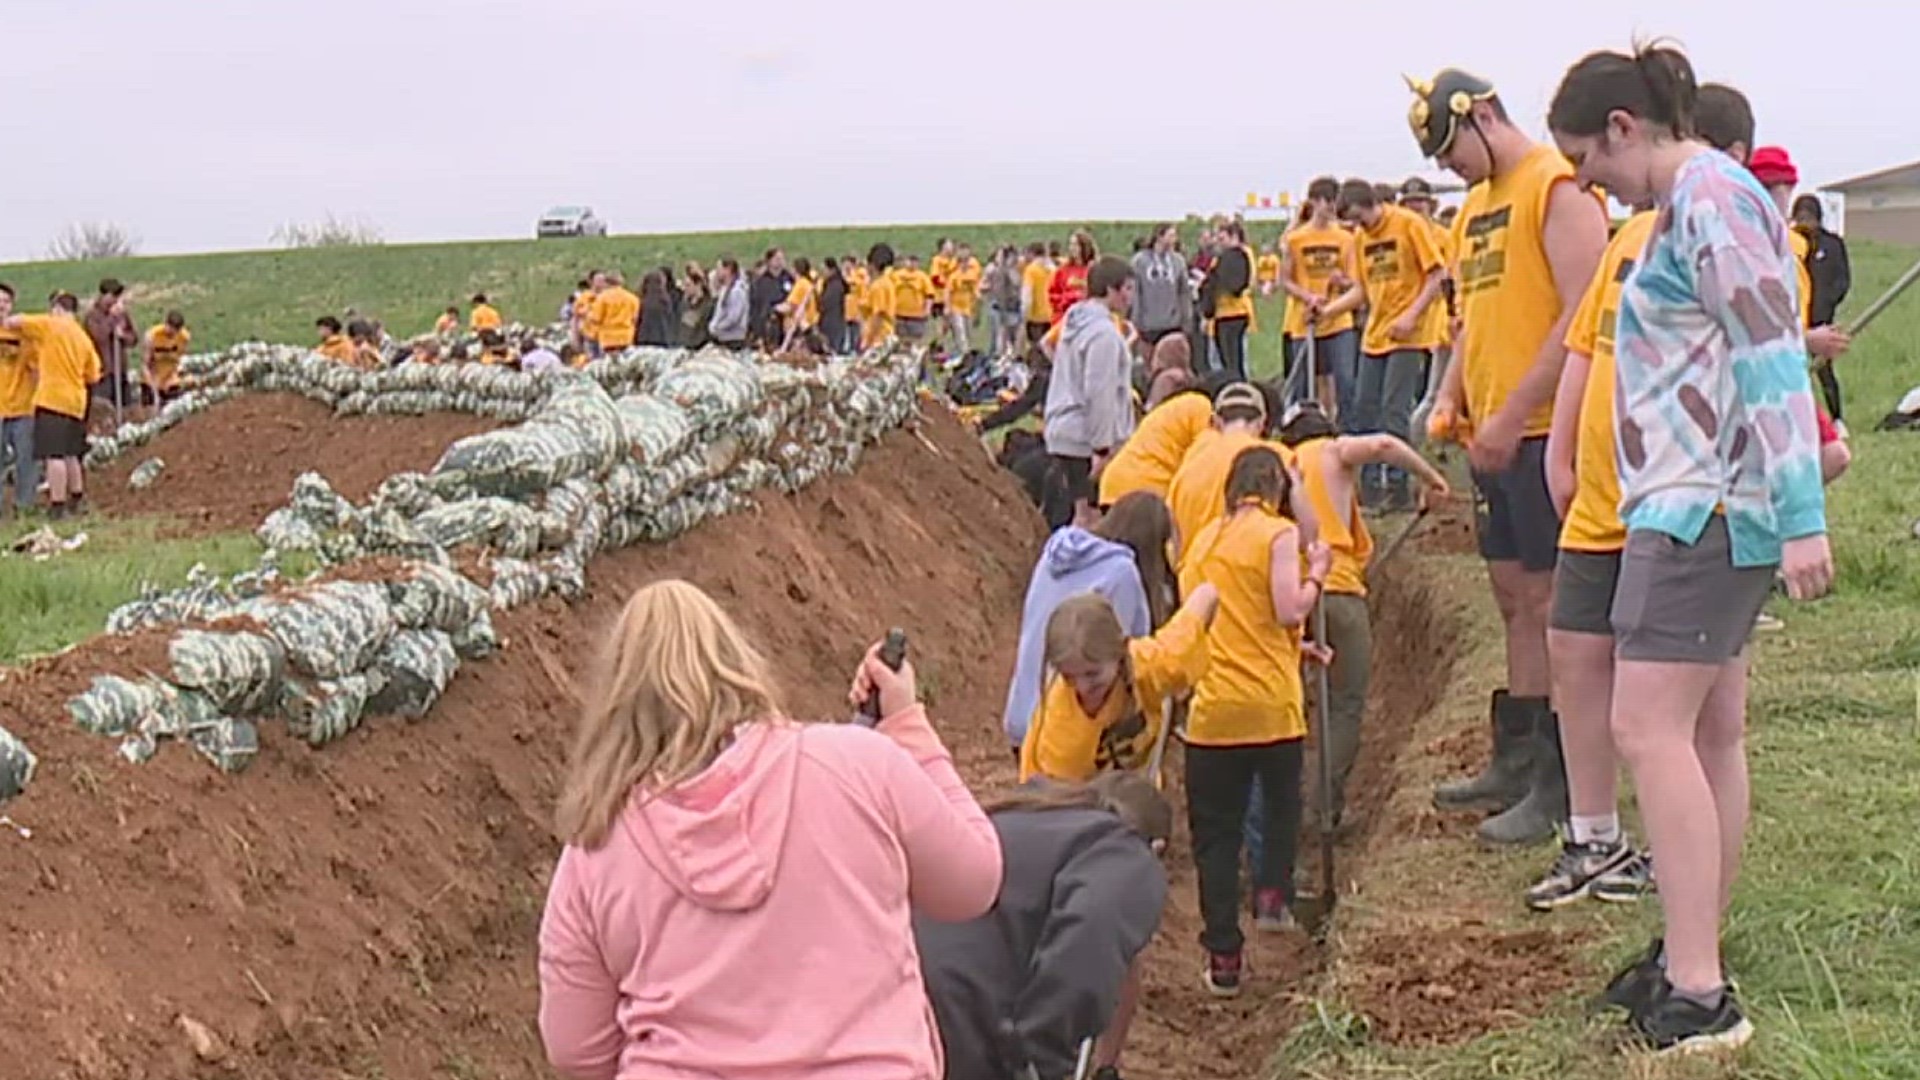 Over 500 students from various grade levels were building their own trenches along the Solanco High School grounds on Thursday, April 18.